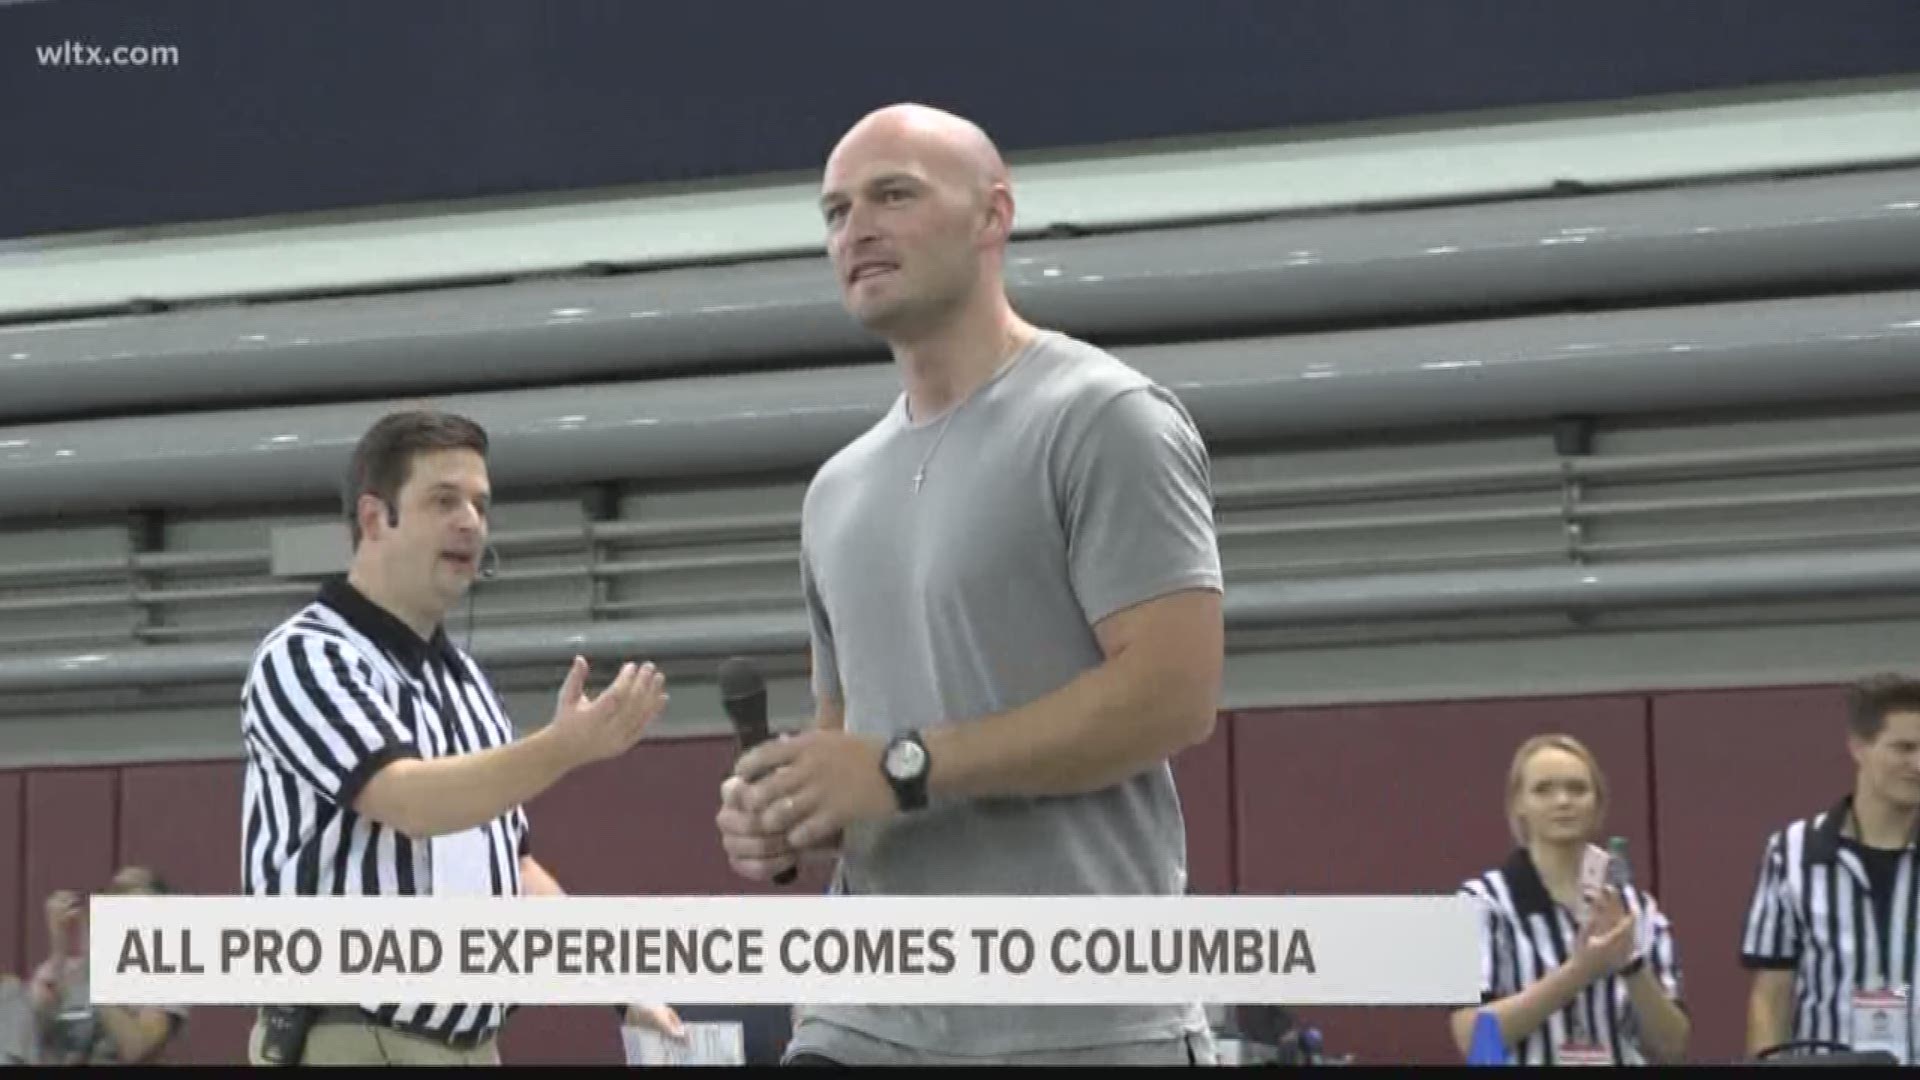 South Carolina's top quarterback in program history, Connor Shaw, came back to Columbia to host the All Pro Dad Camp and he shared his thoughts on fatherhood and what it's like being a coach at Furman.